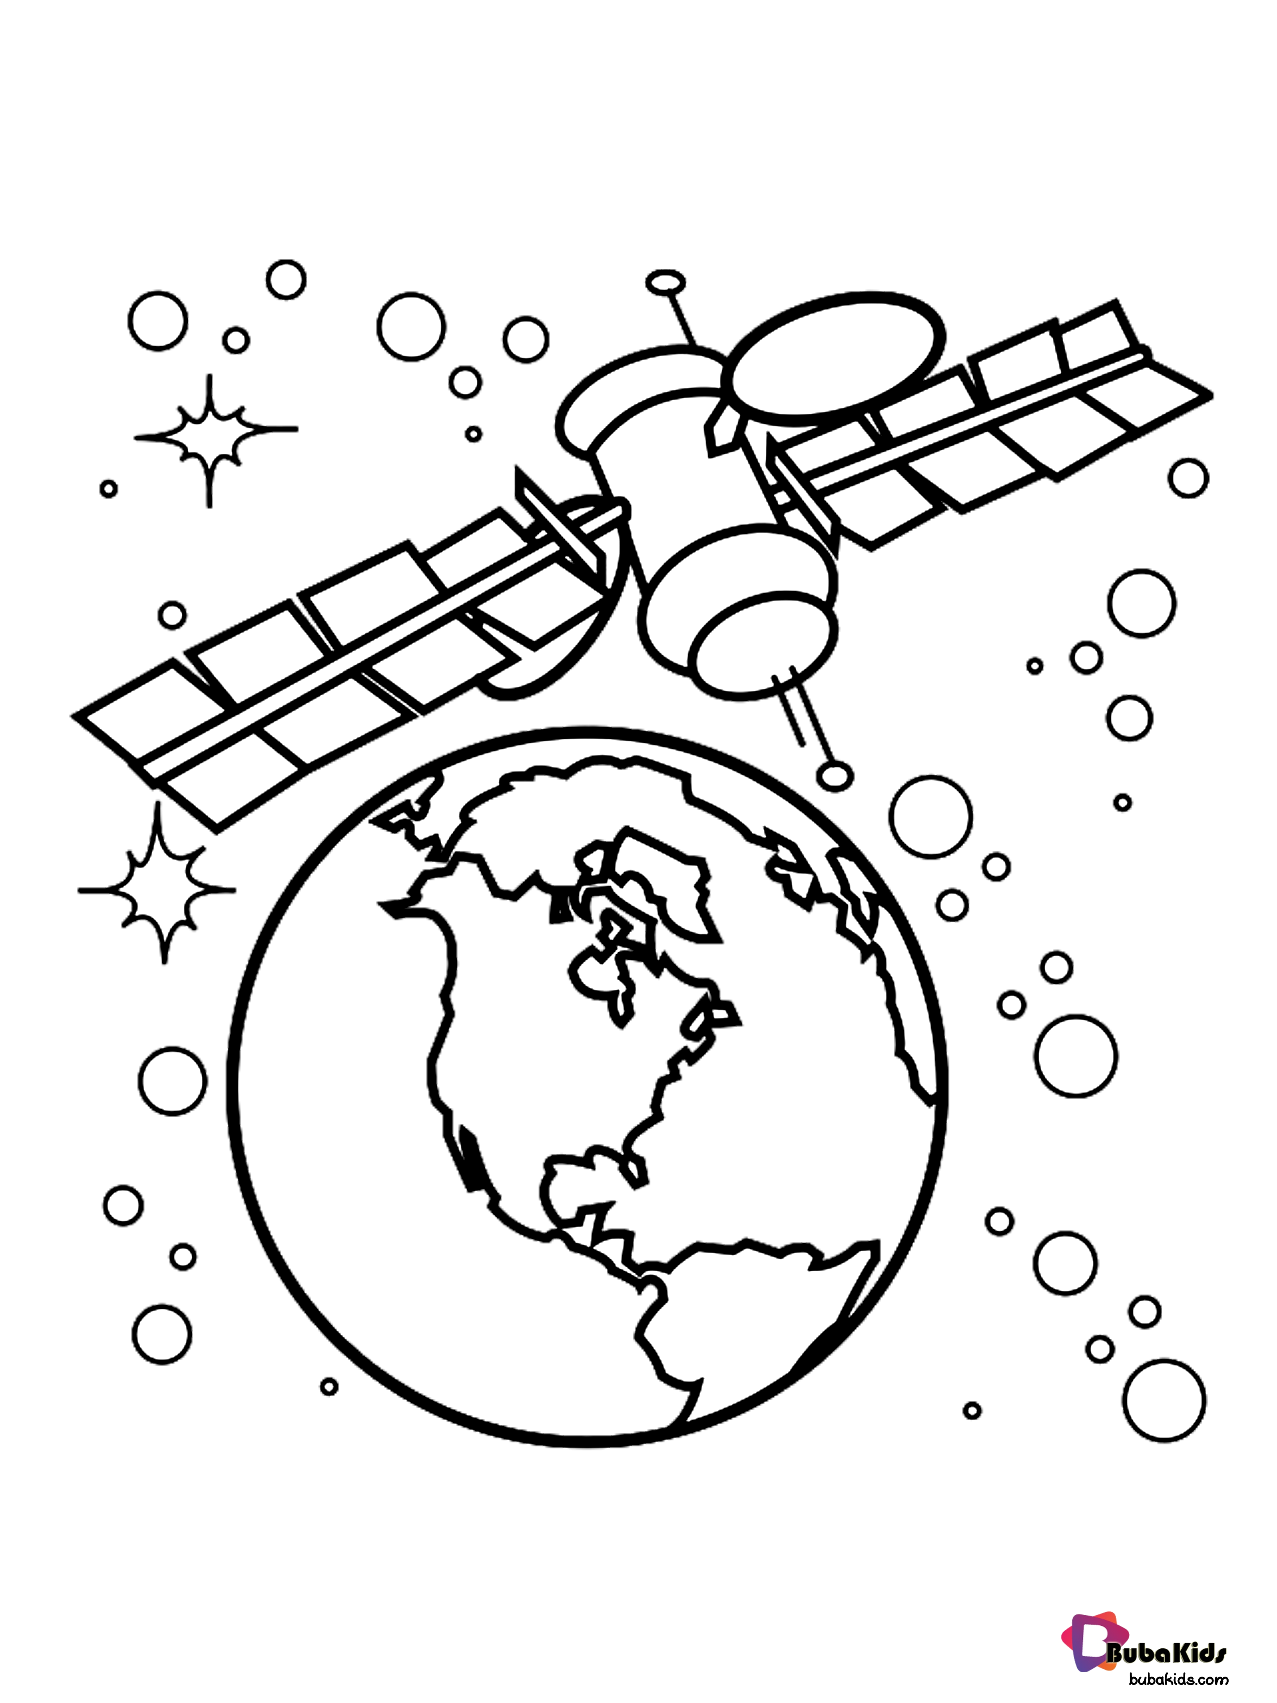 Outer space satellite orbiting earth coloring page Wallpaper